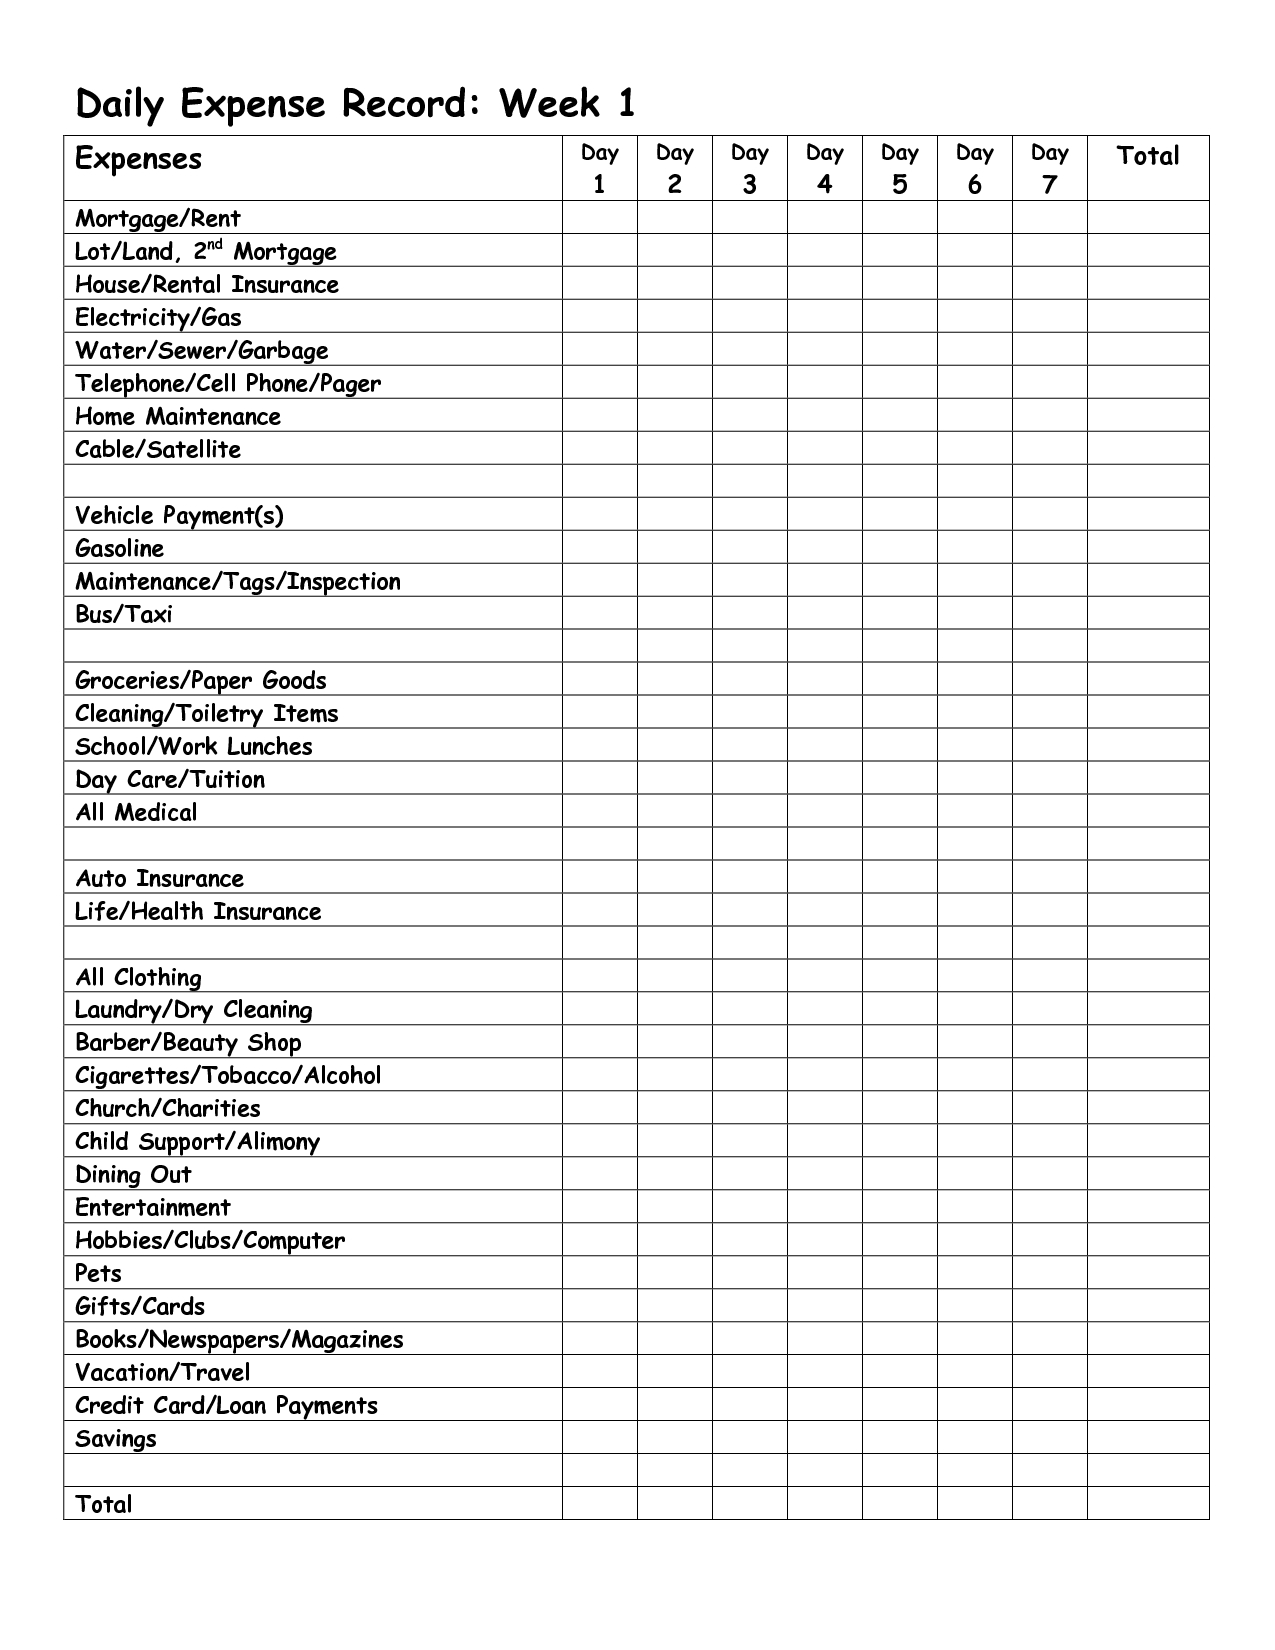 List Down Your Weekly Expenses With This Free Printable Weekly Daily